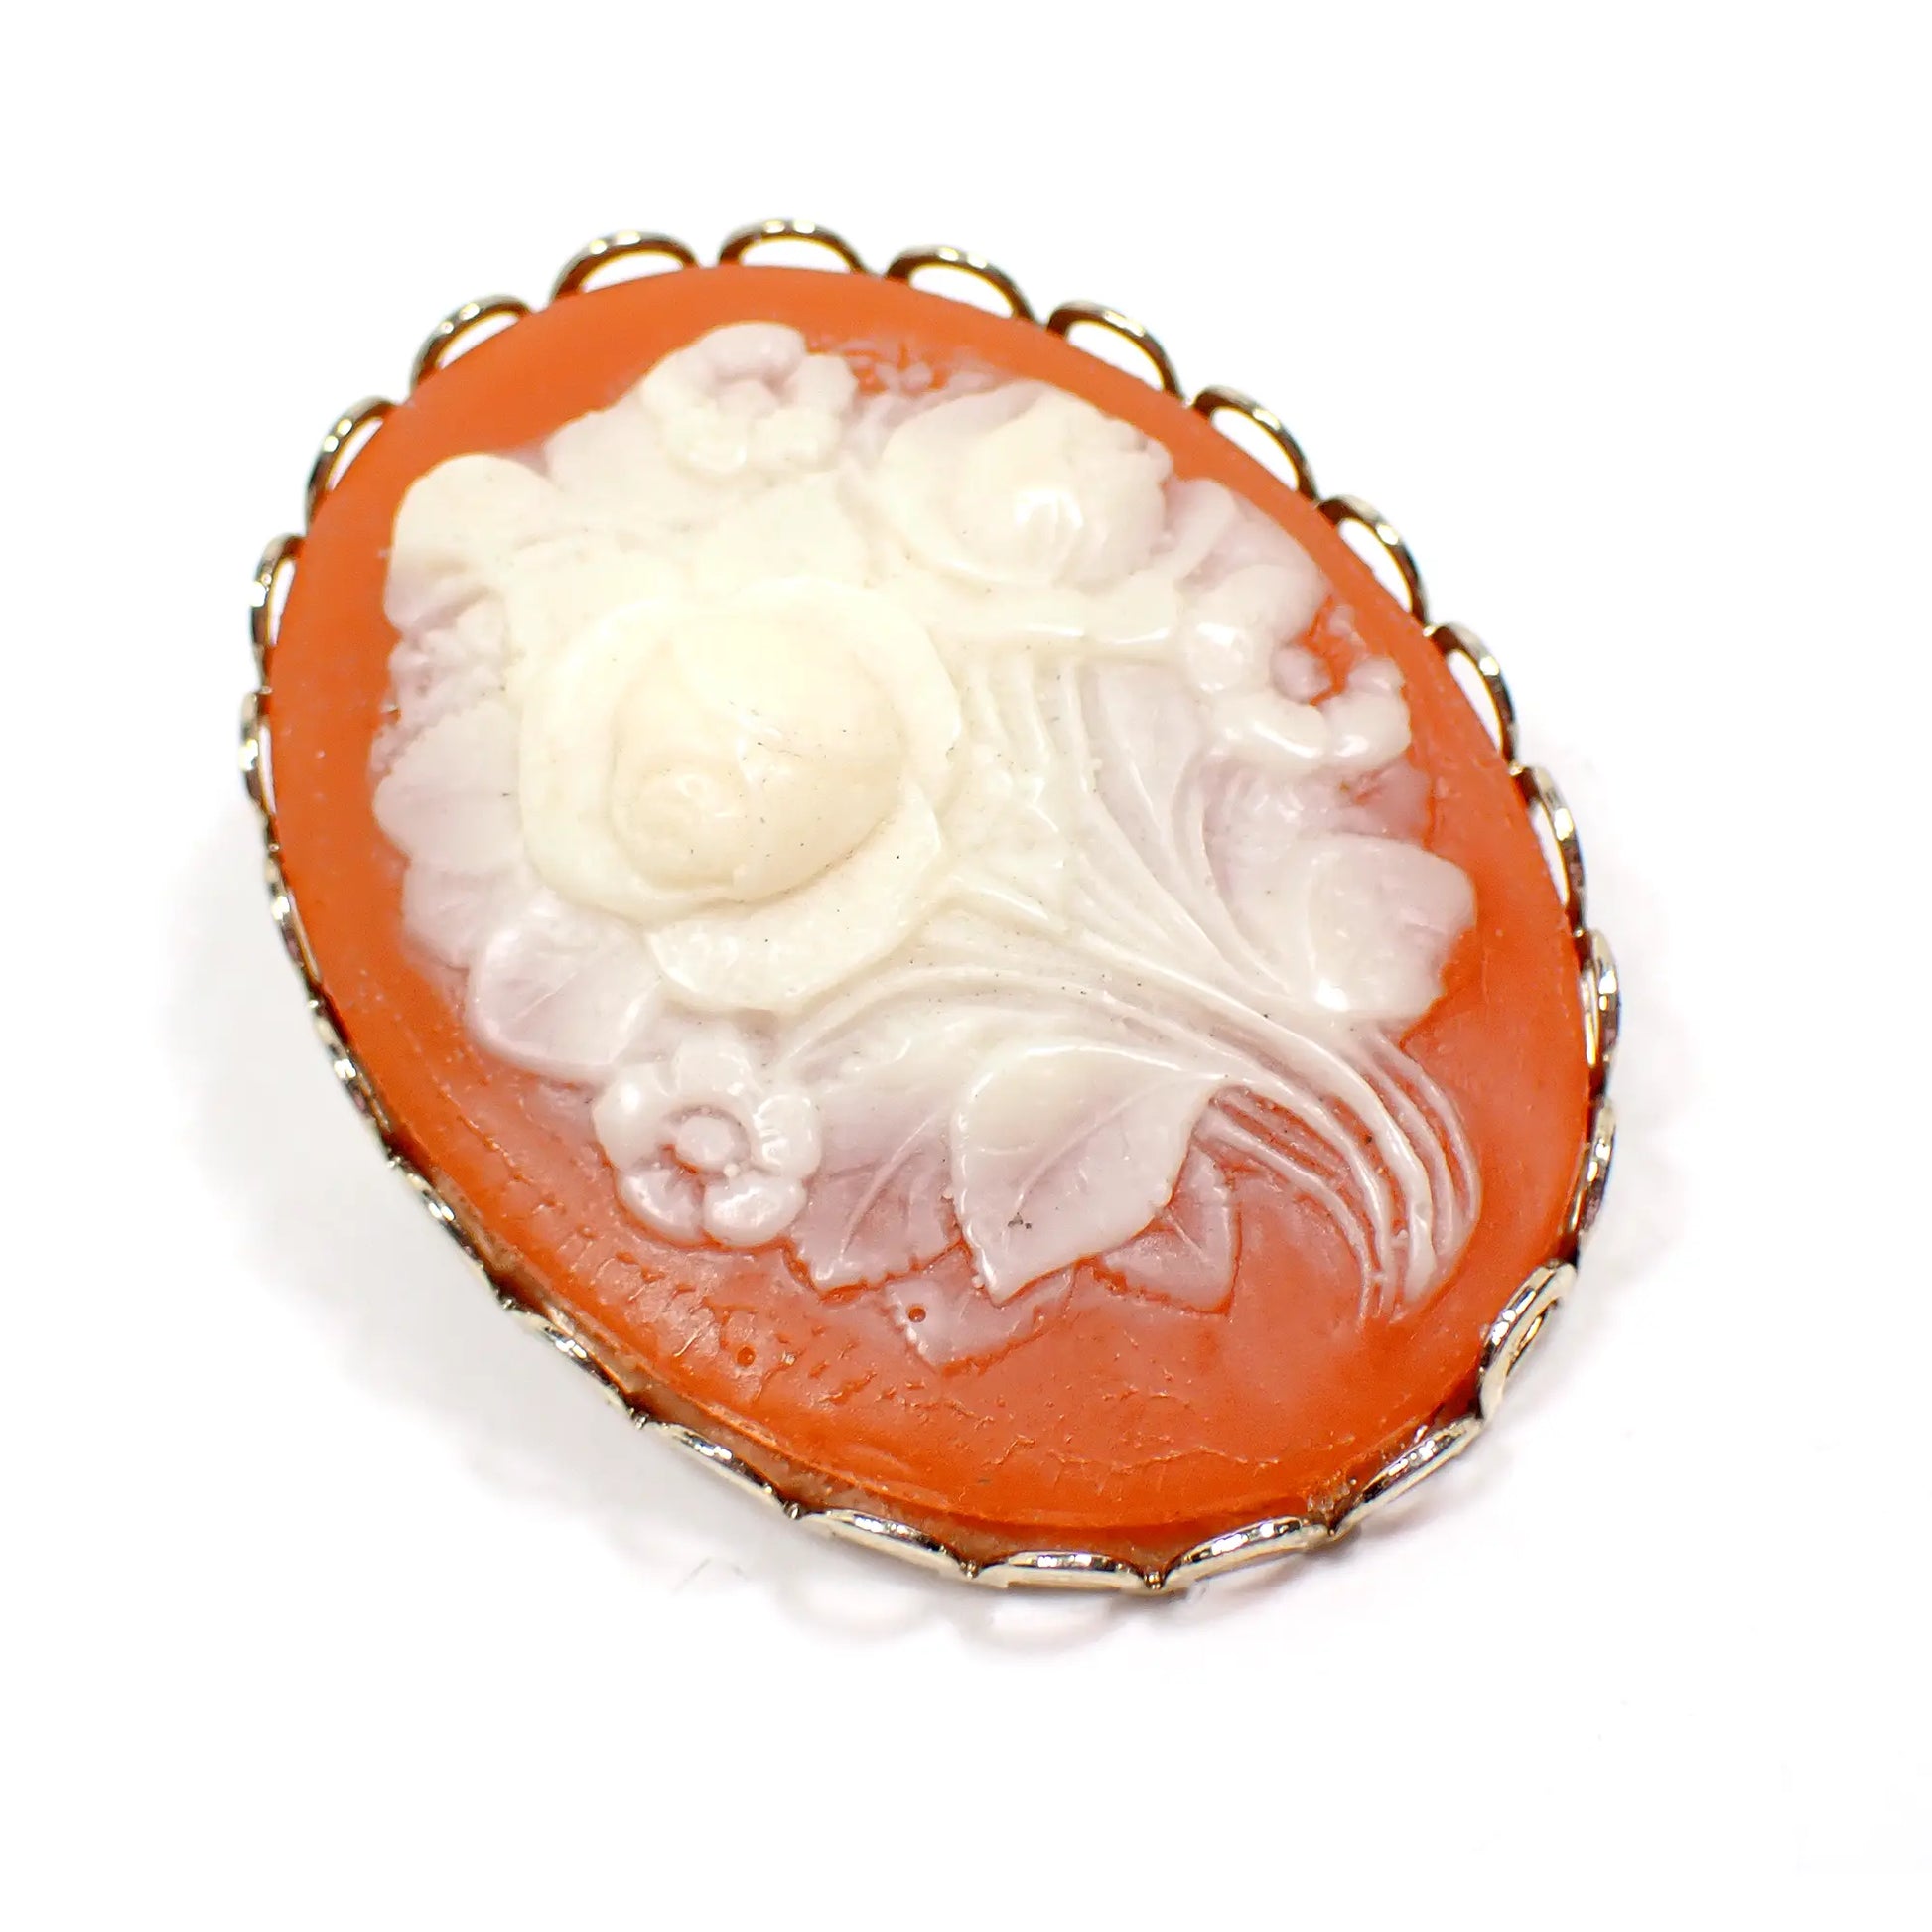 Angled front photo of the vintage molded plastic floral cameo brooch. It has an oval shape with flowers in the middle in an off white light yellow color. The background is salmon orange and the setting is gold tone plated.